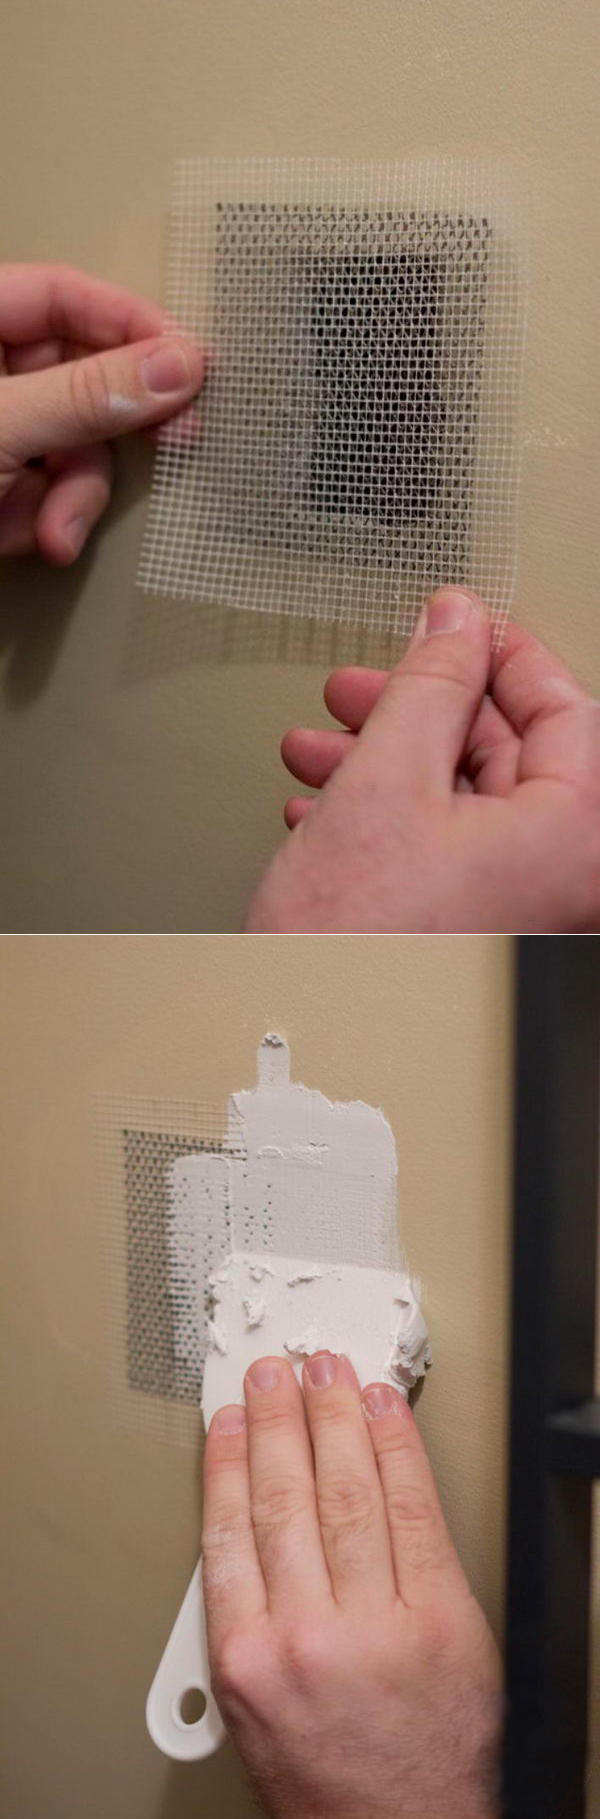 YITAP professional drywall joint tape how to use for patch